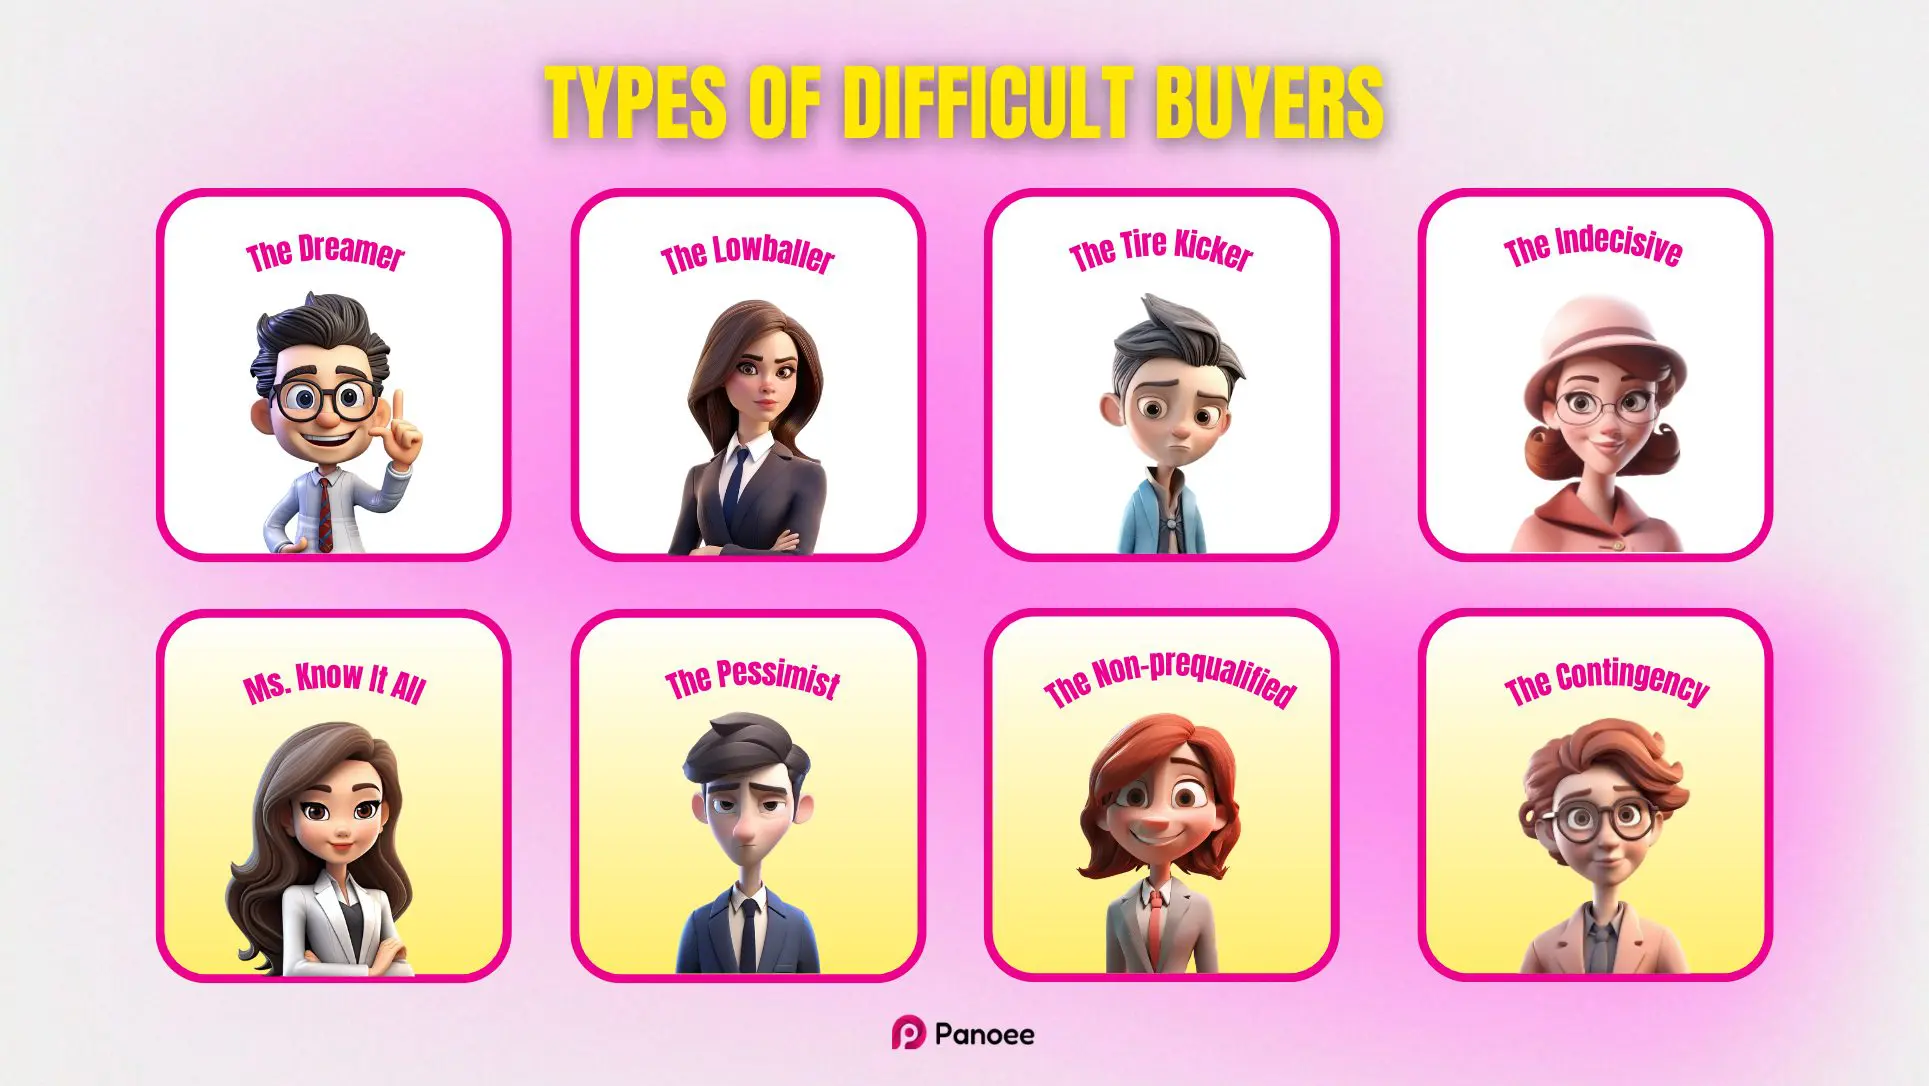 Types of difficult buyers in real estate